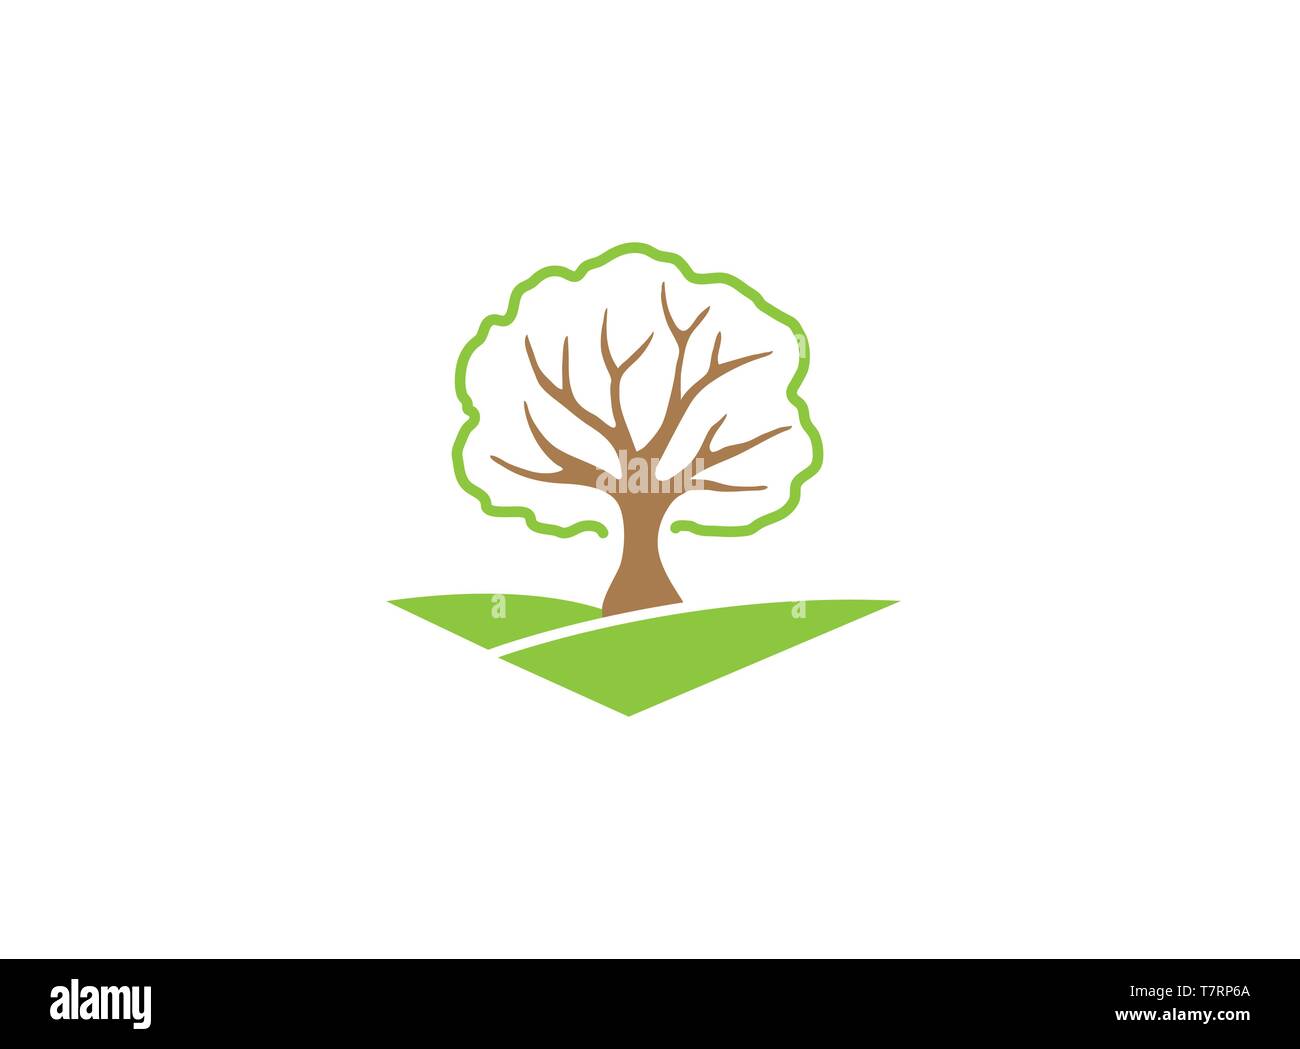 A leafy tree on a green plateau twigs for logo design Stock Vector